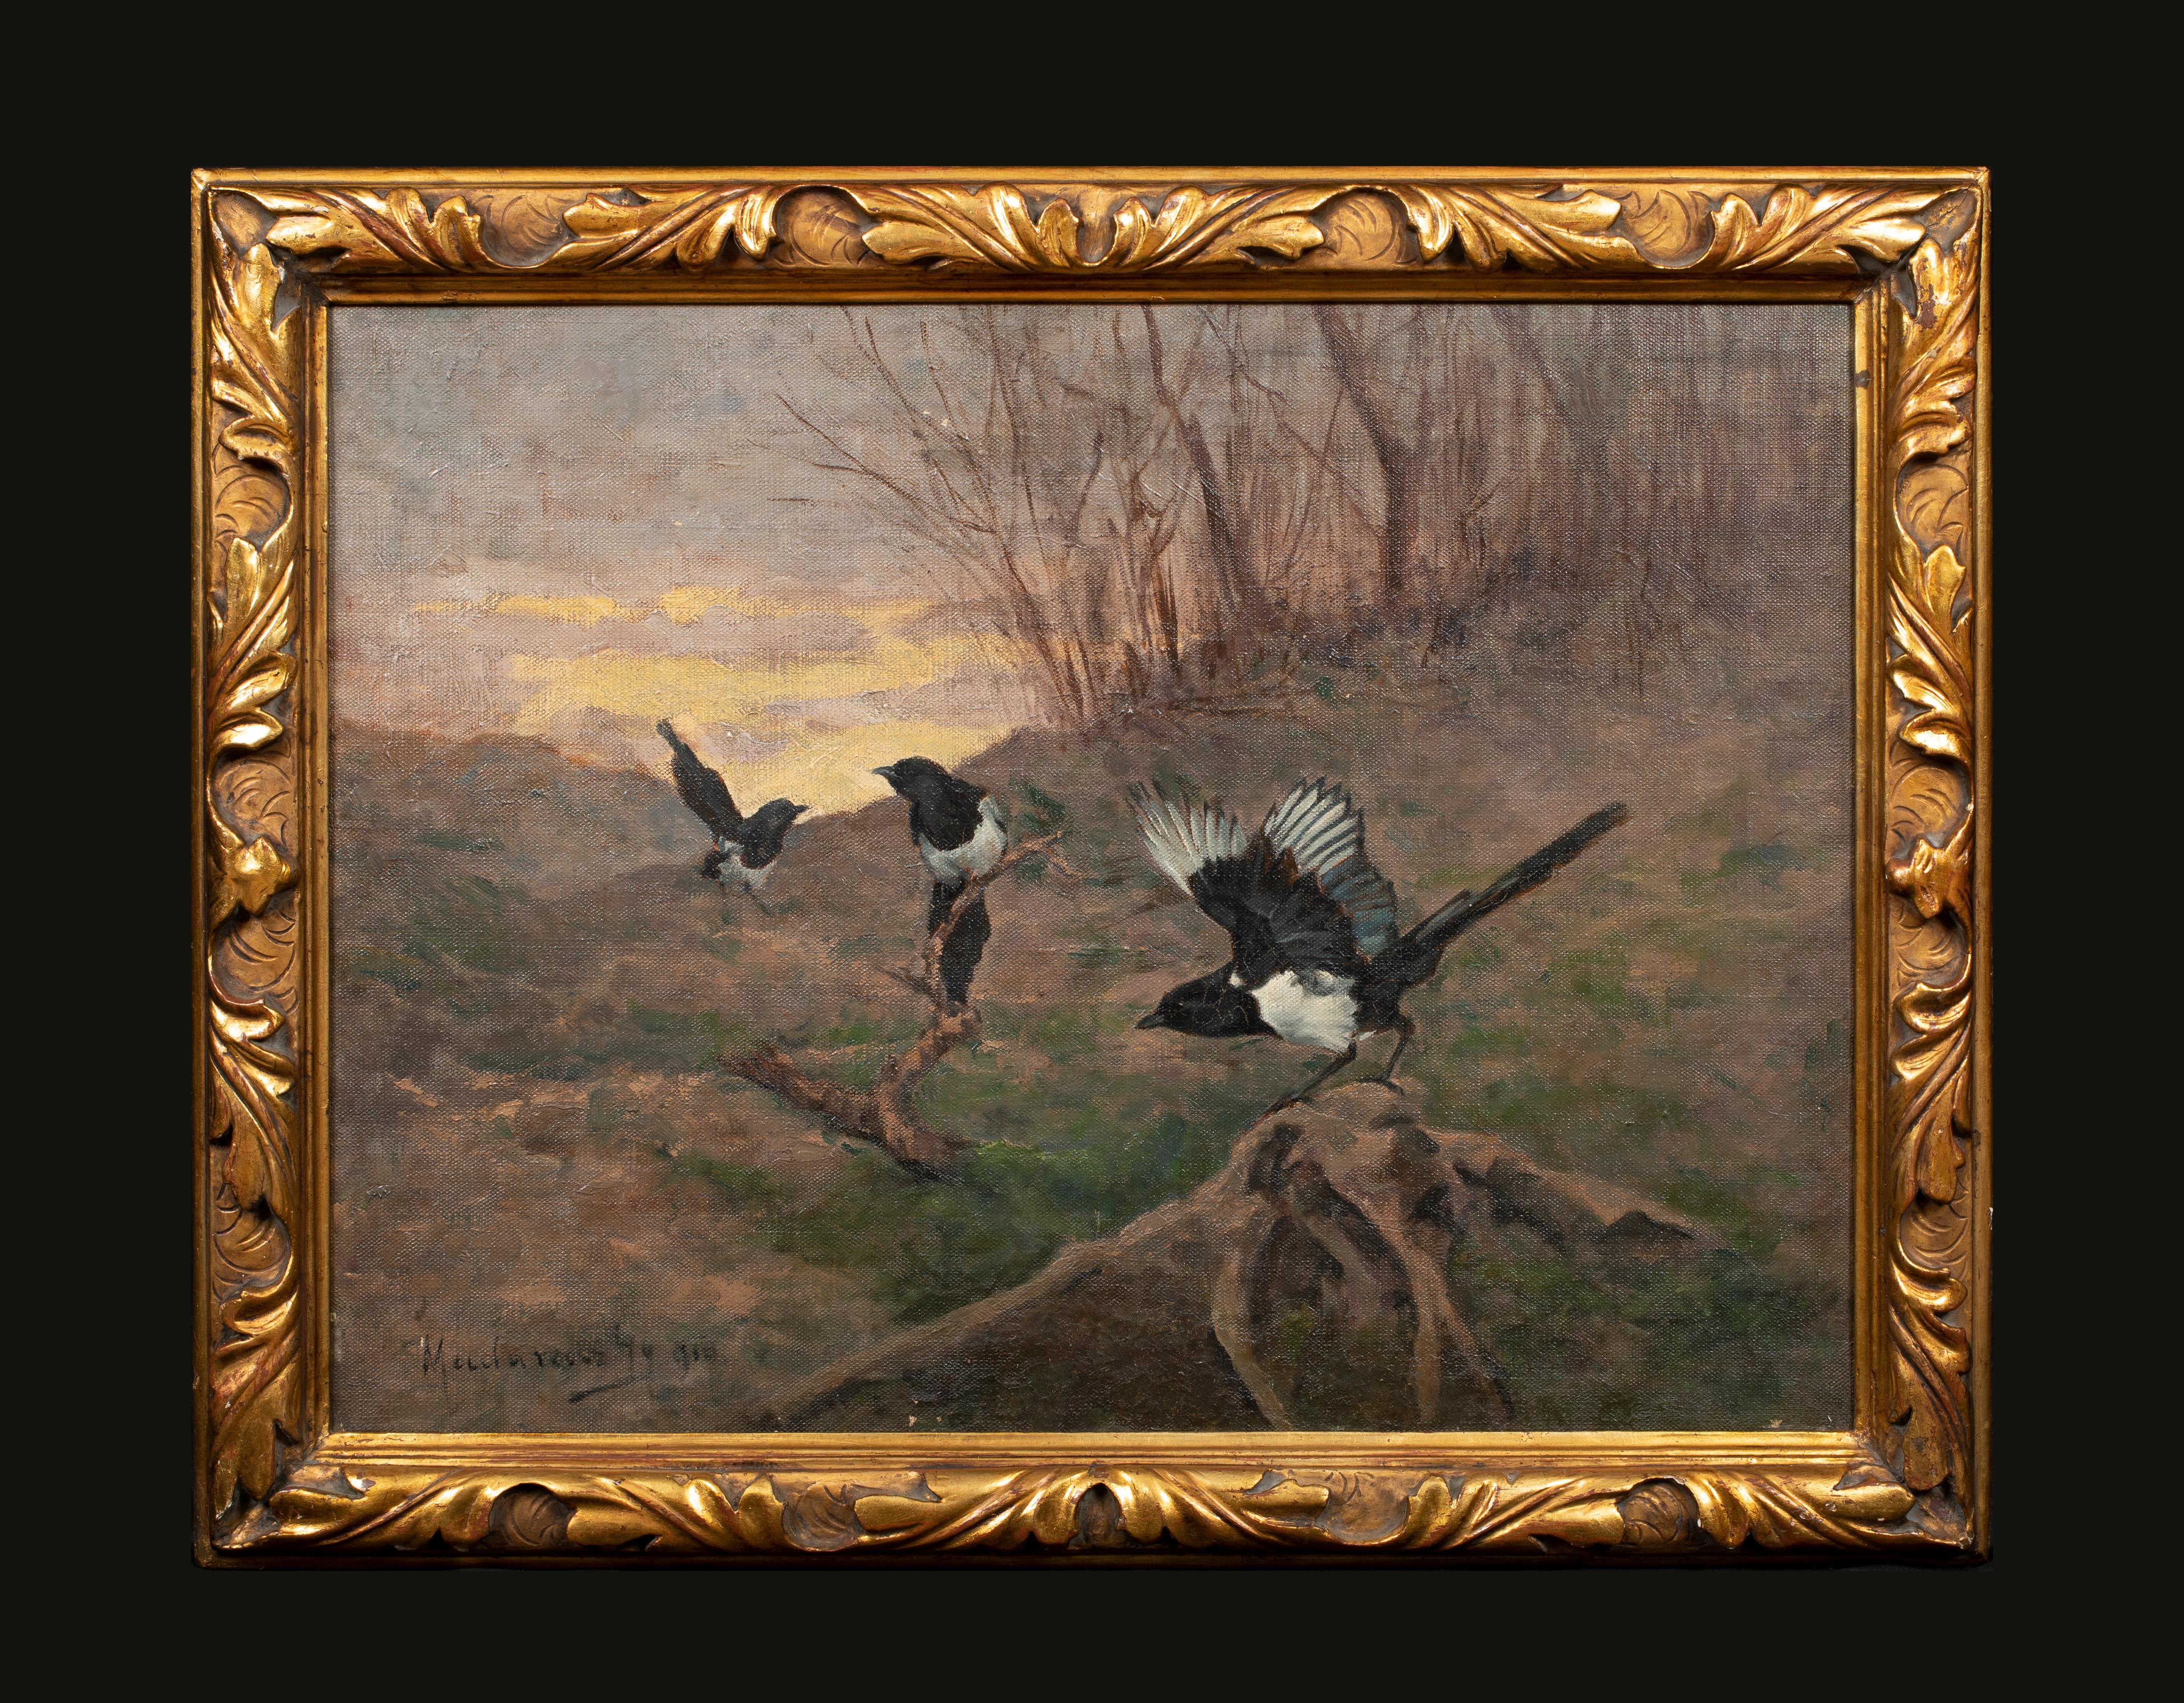 Study Of Magpies In A Landscape, circa 1900 - Painting by Unknown